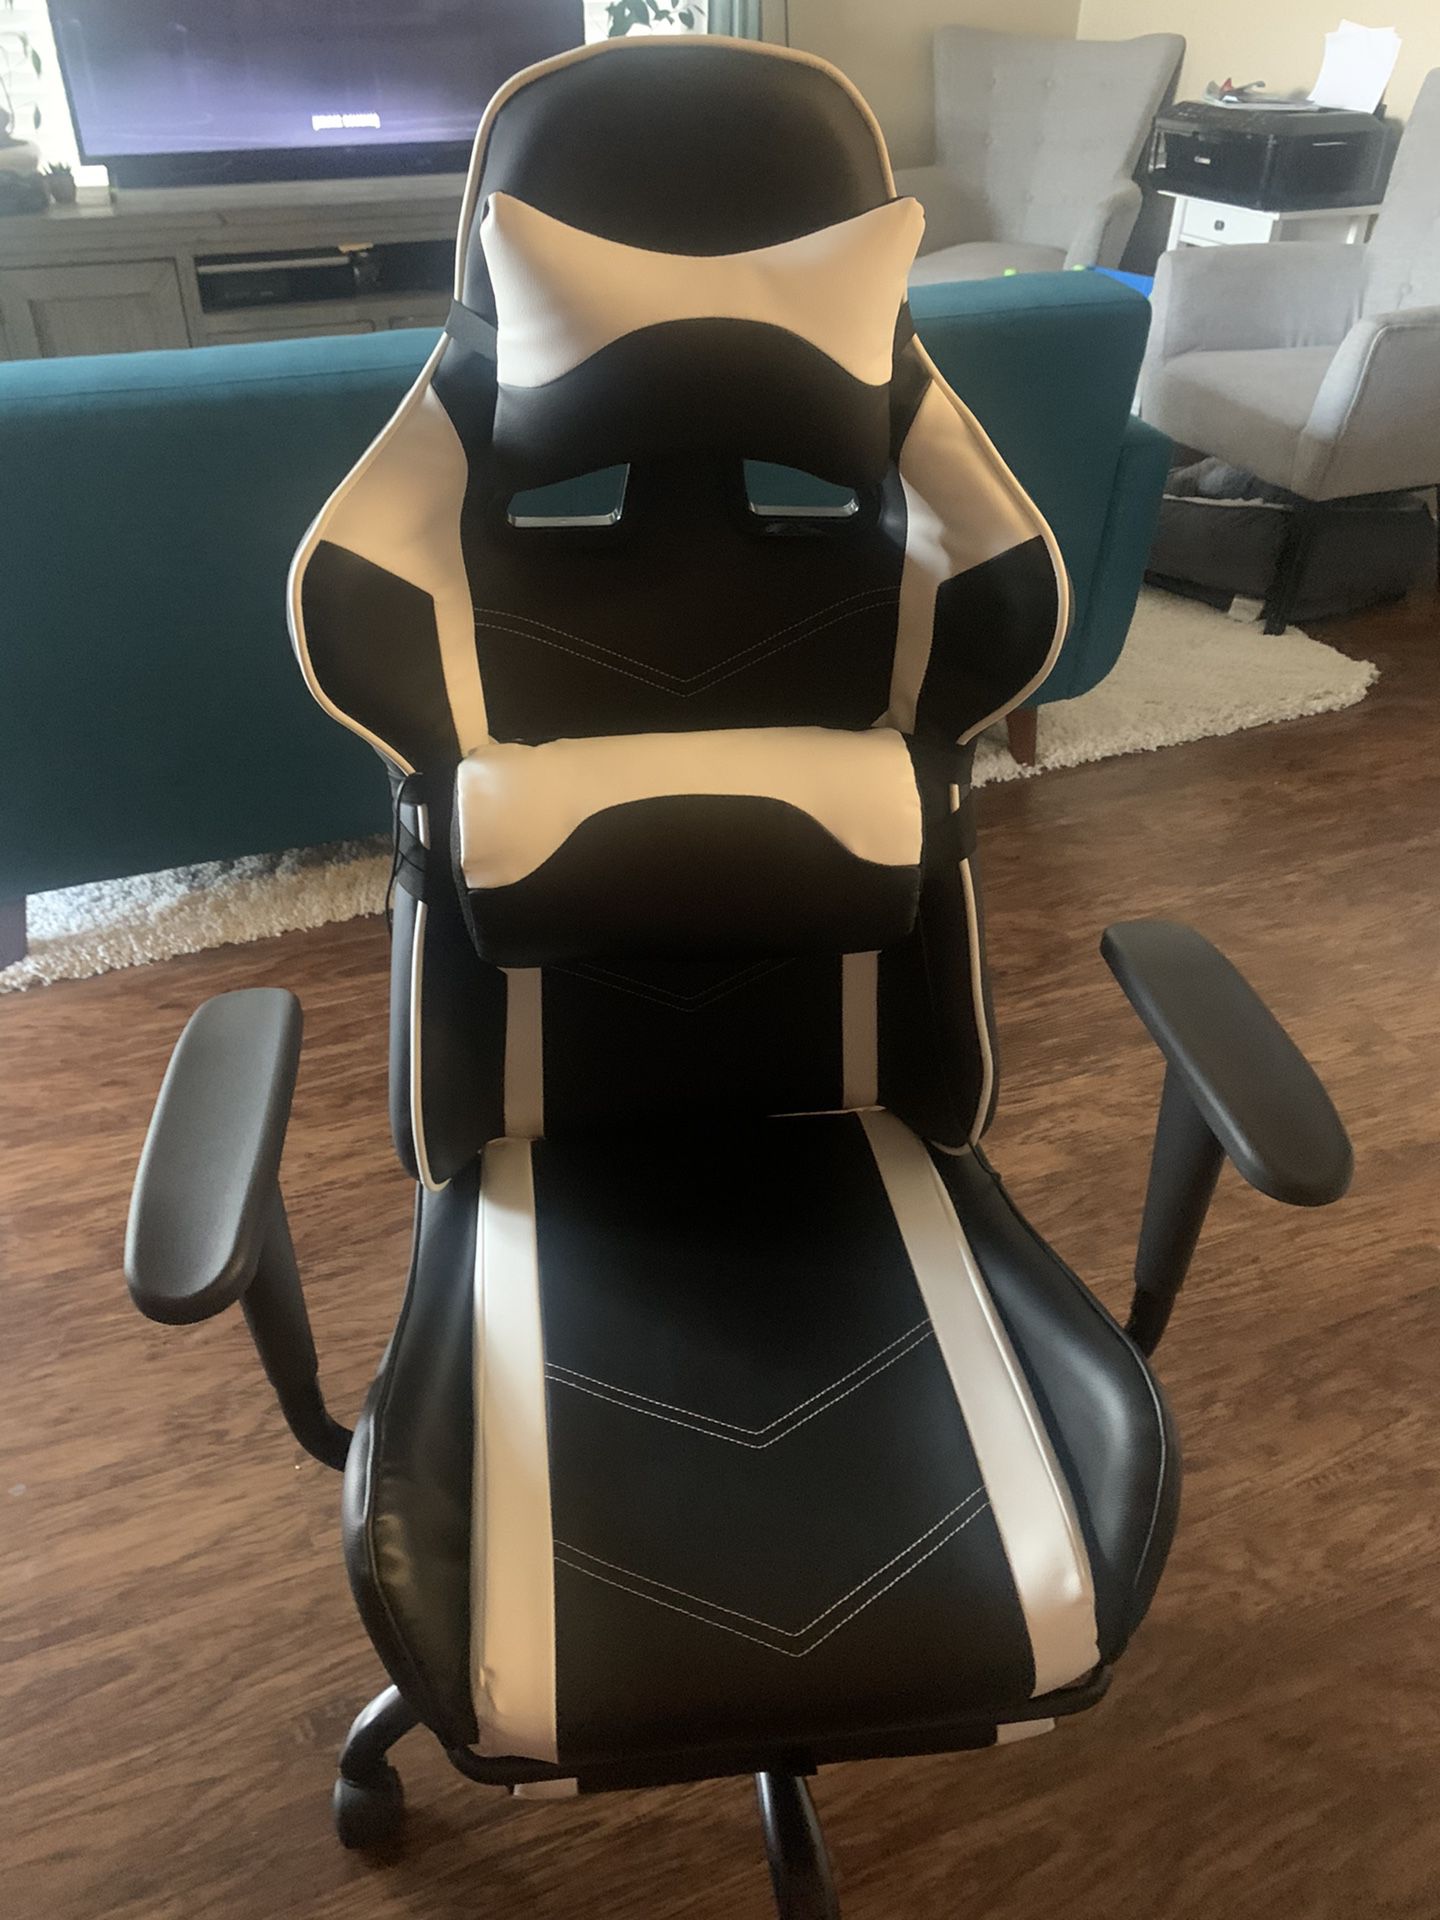 Gamer Chair With Back Massage.